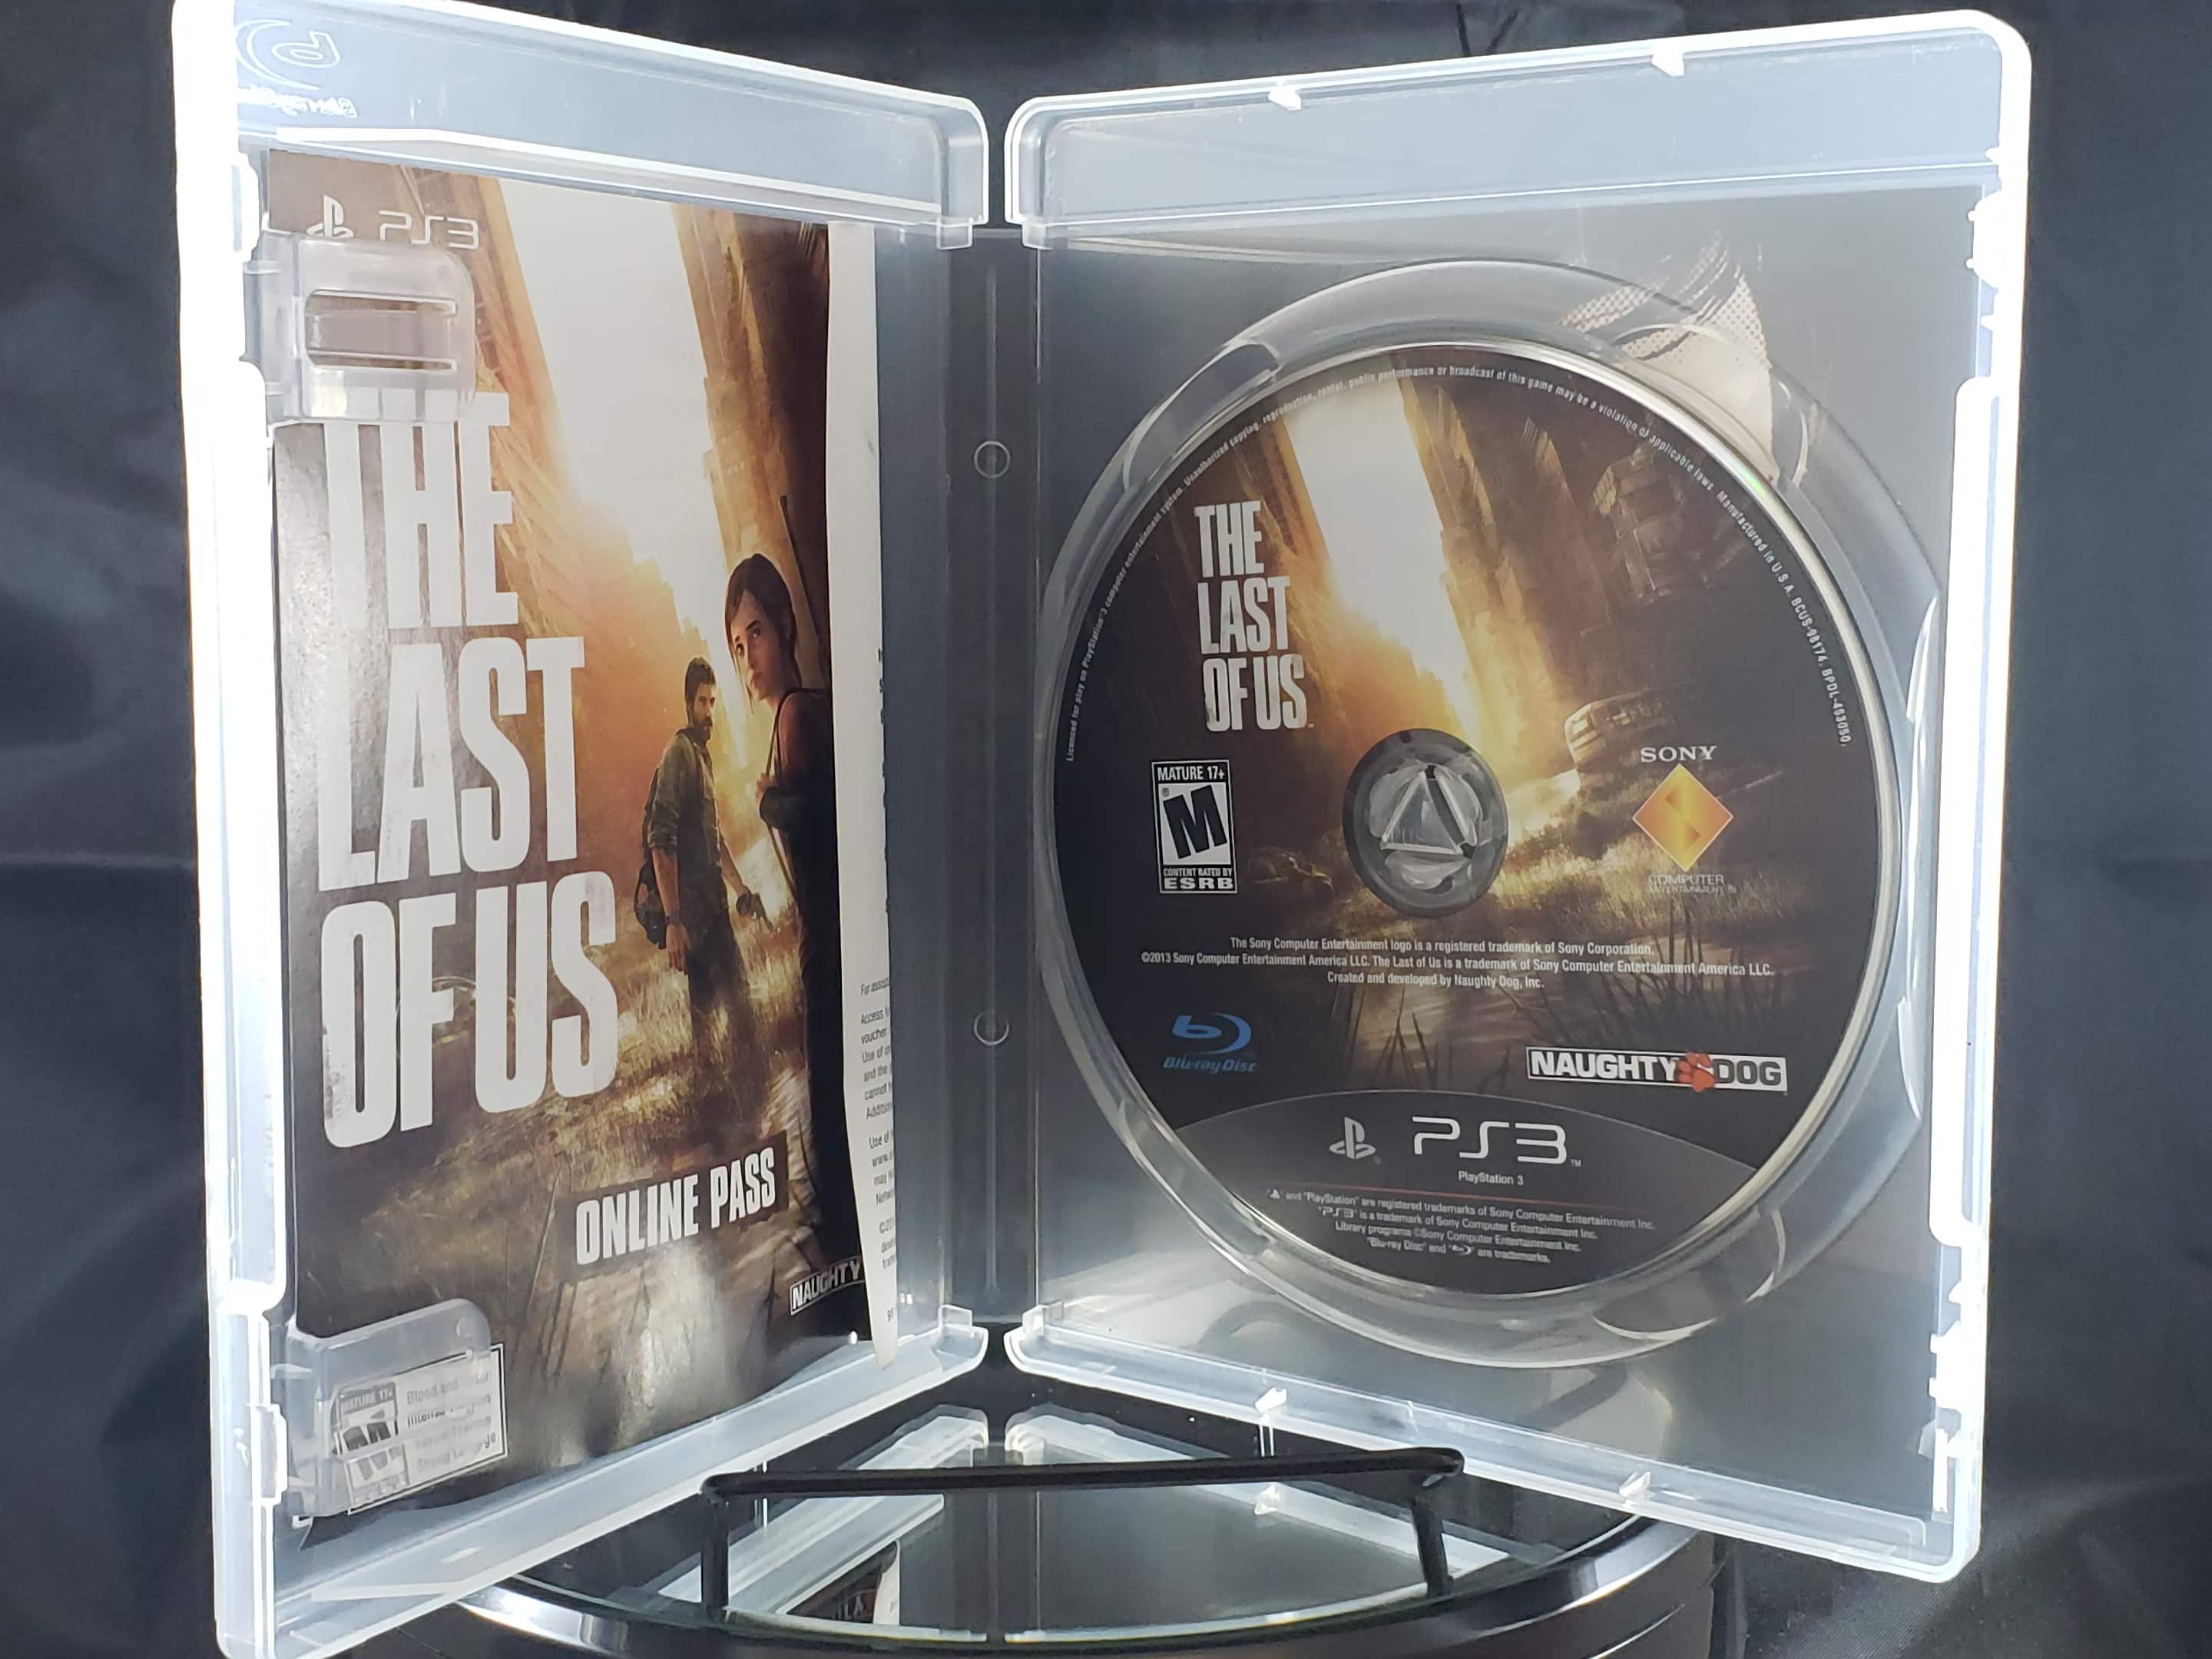 The Last of Us Sony PS3 Mint Disc No Manual PlayStation 3 711719981749